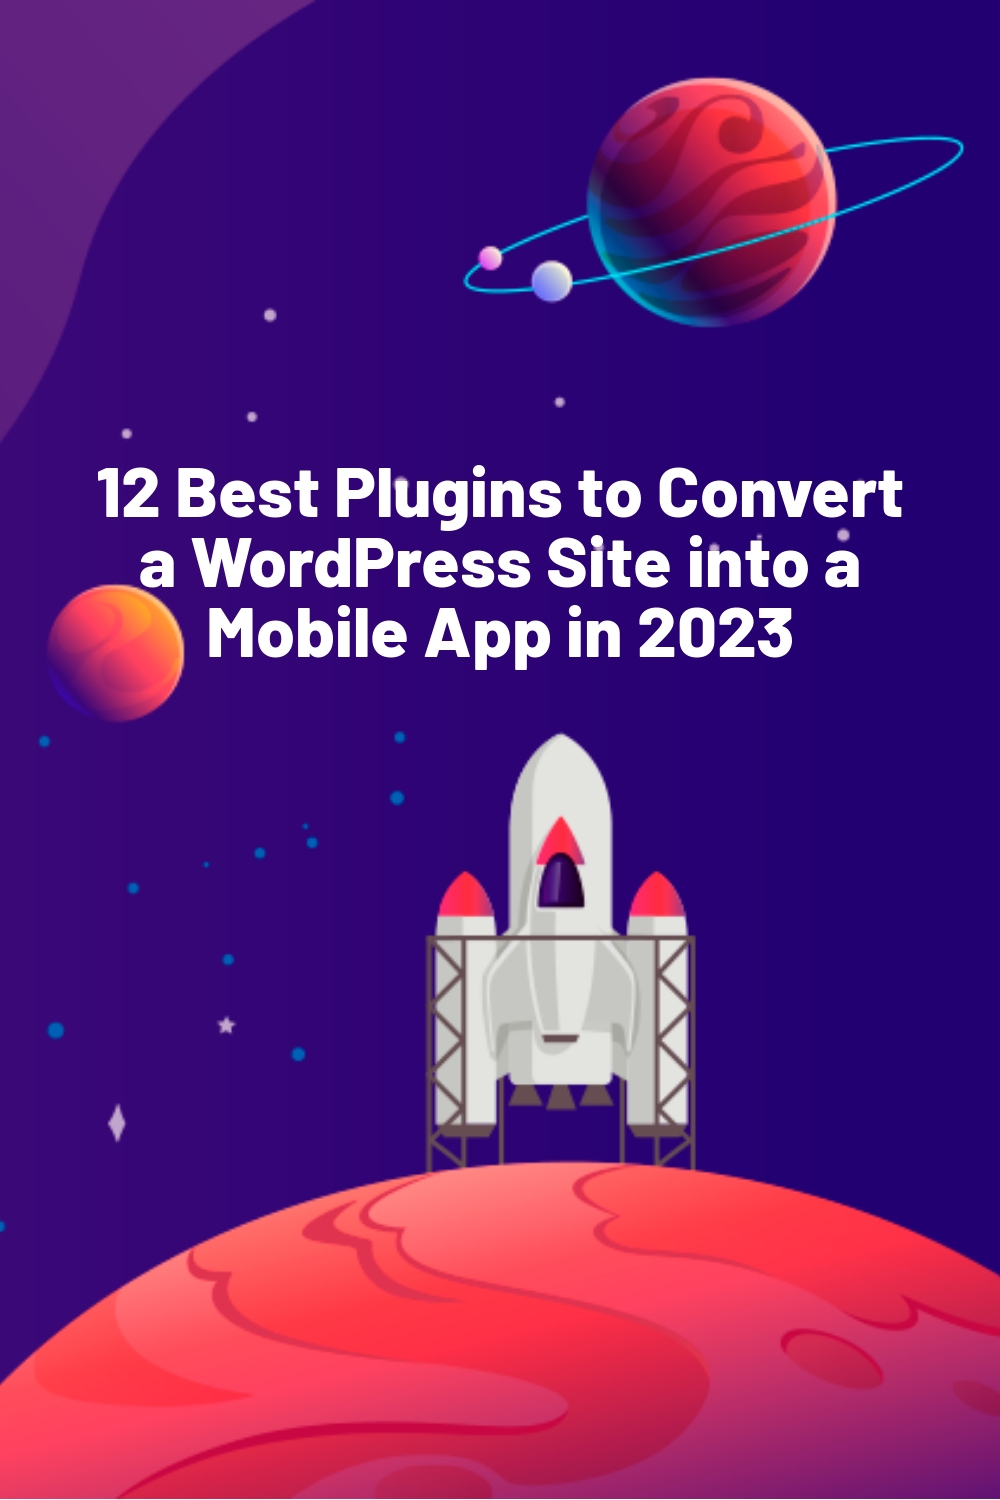 12 Best Plugins to Convert a WordPress Site into a Mobile App in 2023